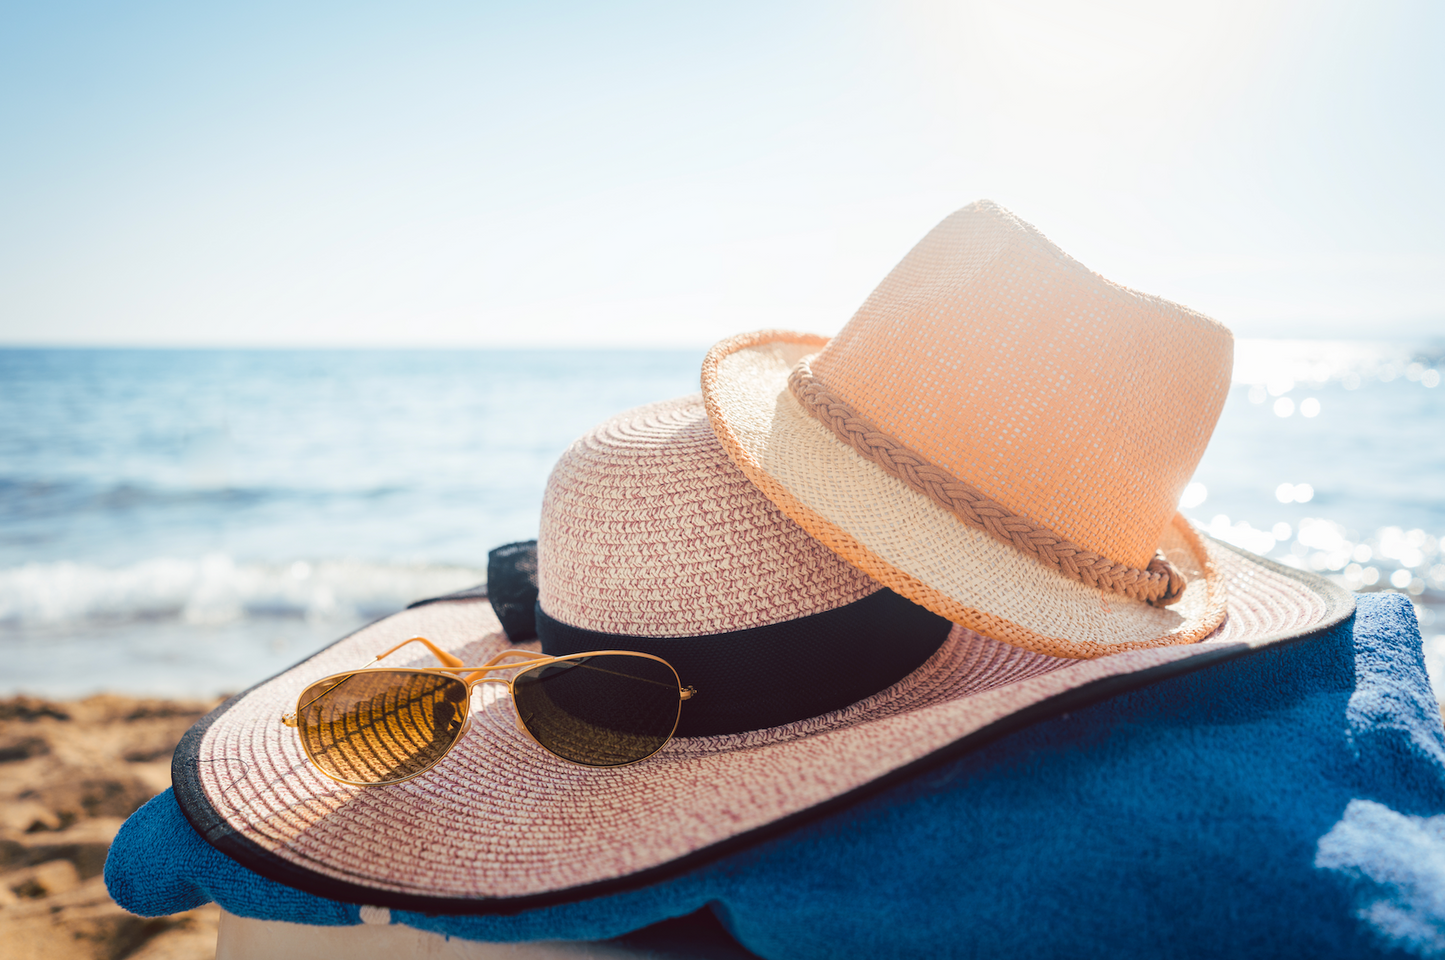 Don’t Forget Your Hat: The Effects of UV Exposure